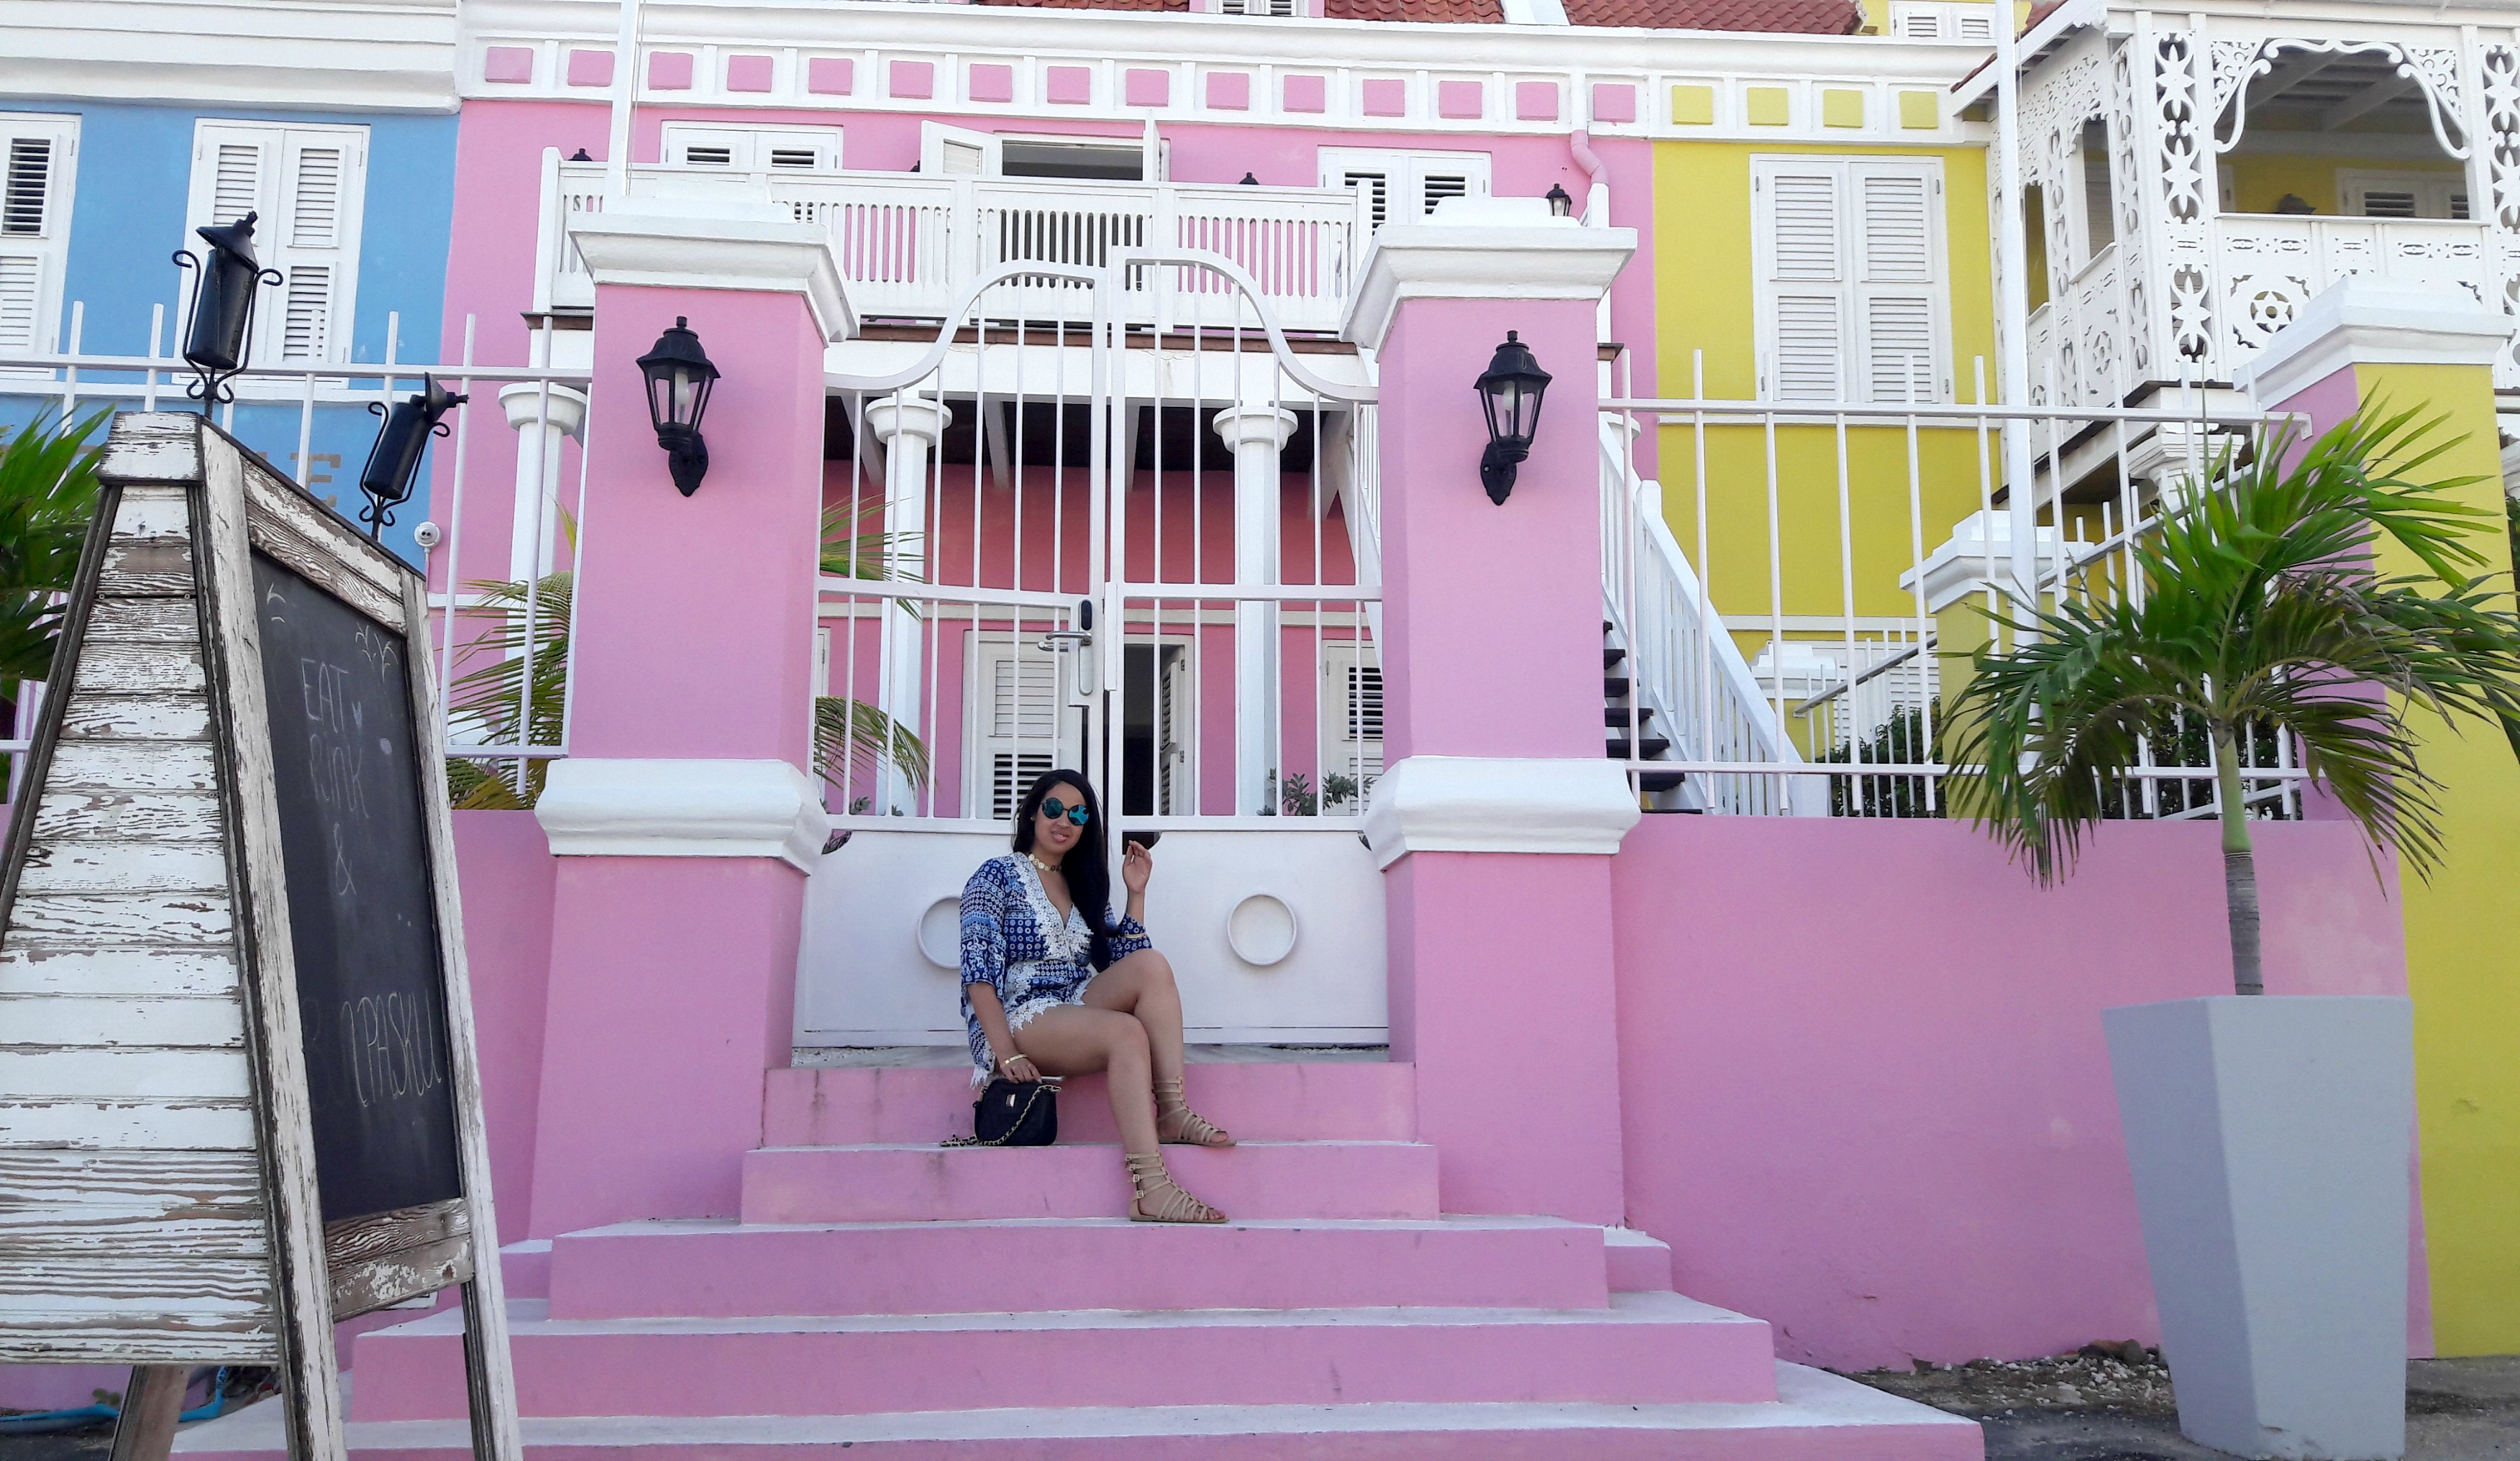 vibrant-colors-willemstad-curacao-11